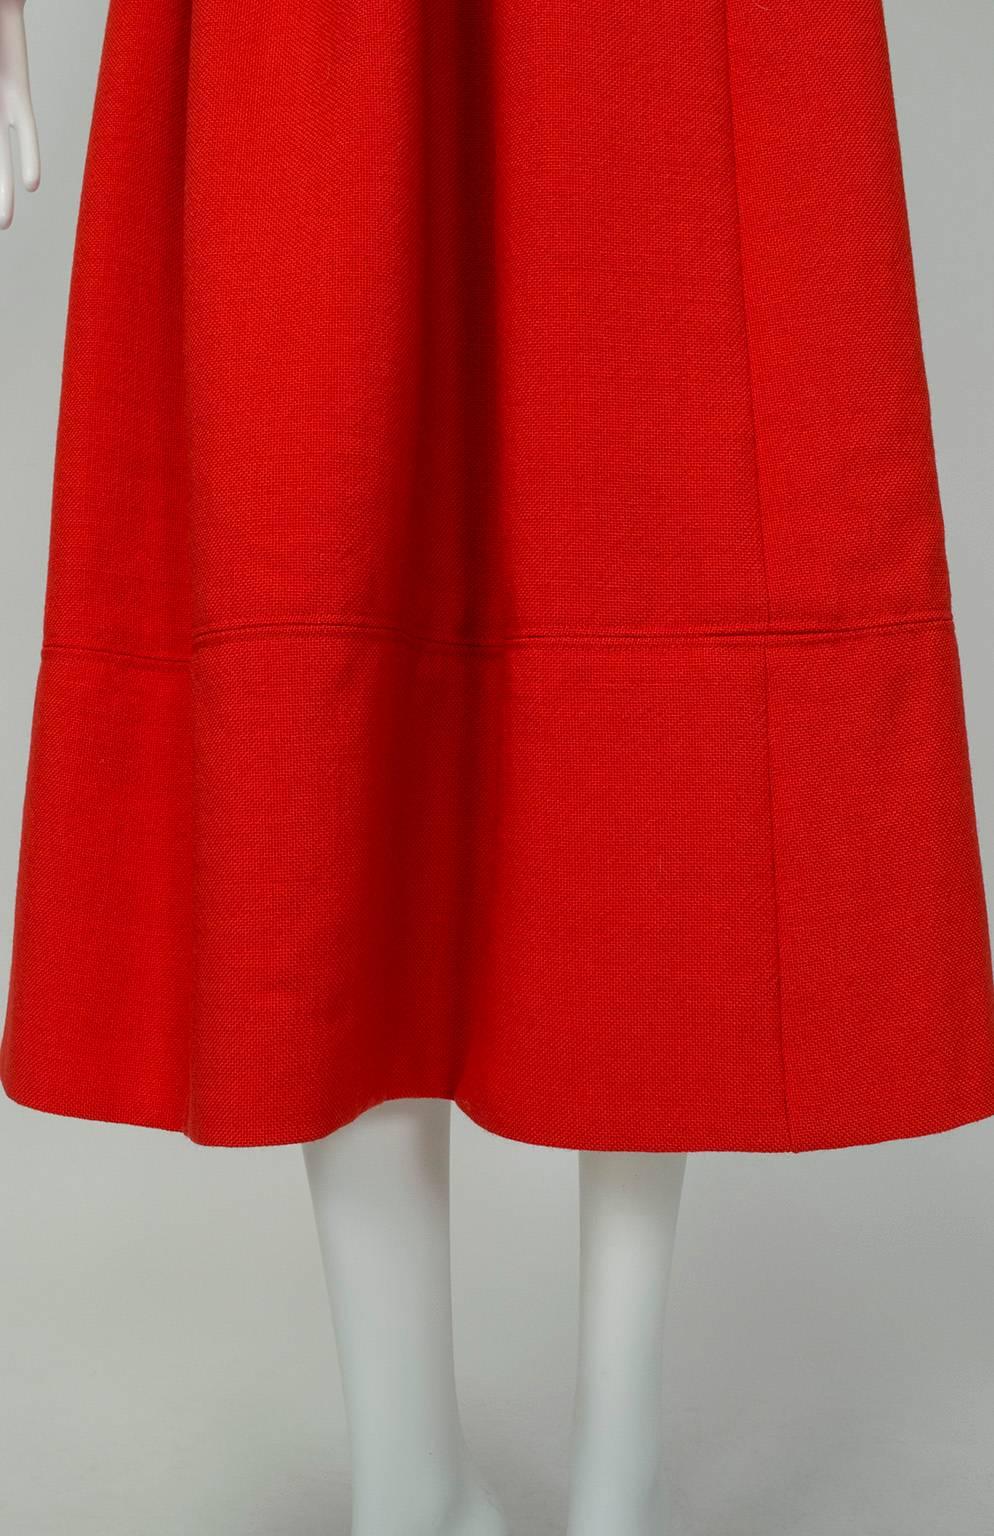 Norman Norell Heavyweight Red Gathered Hostess Skirt - Small, 1960s For Sale 4